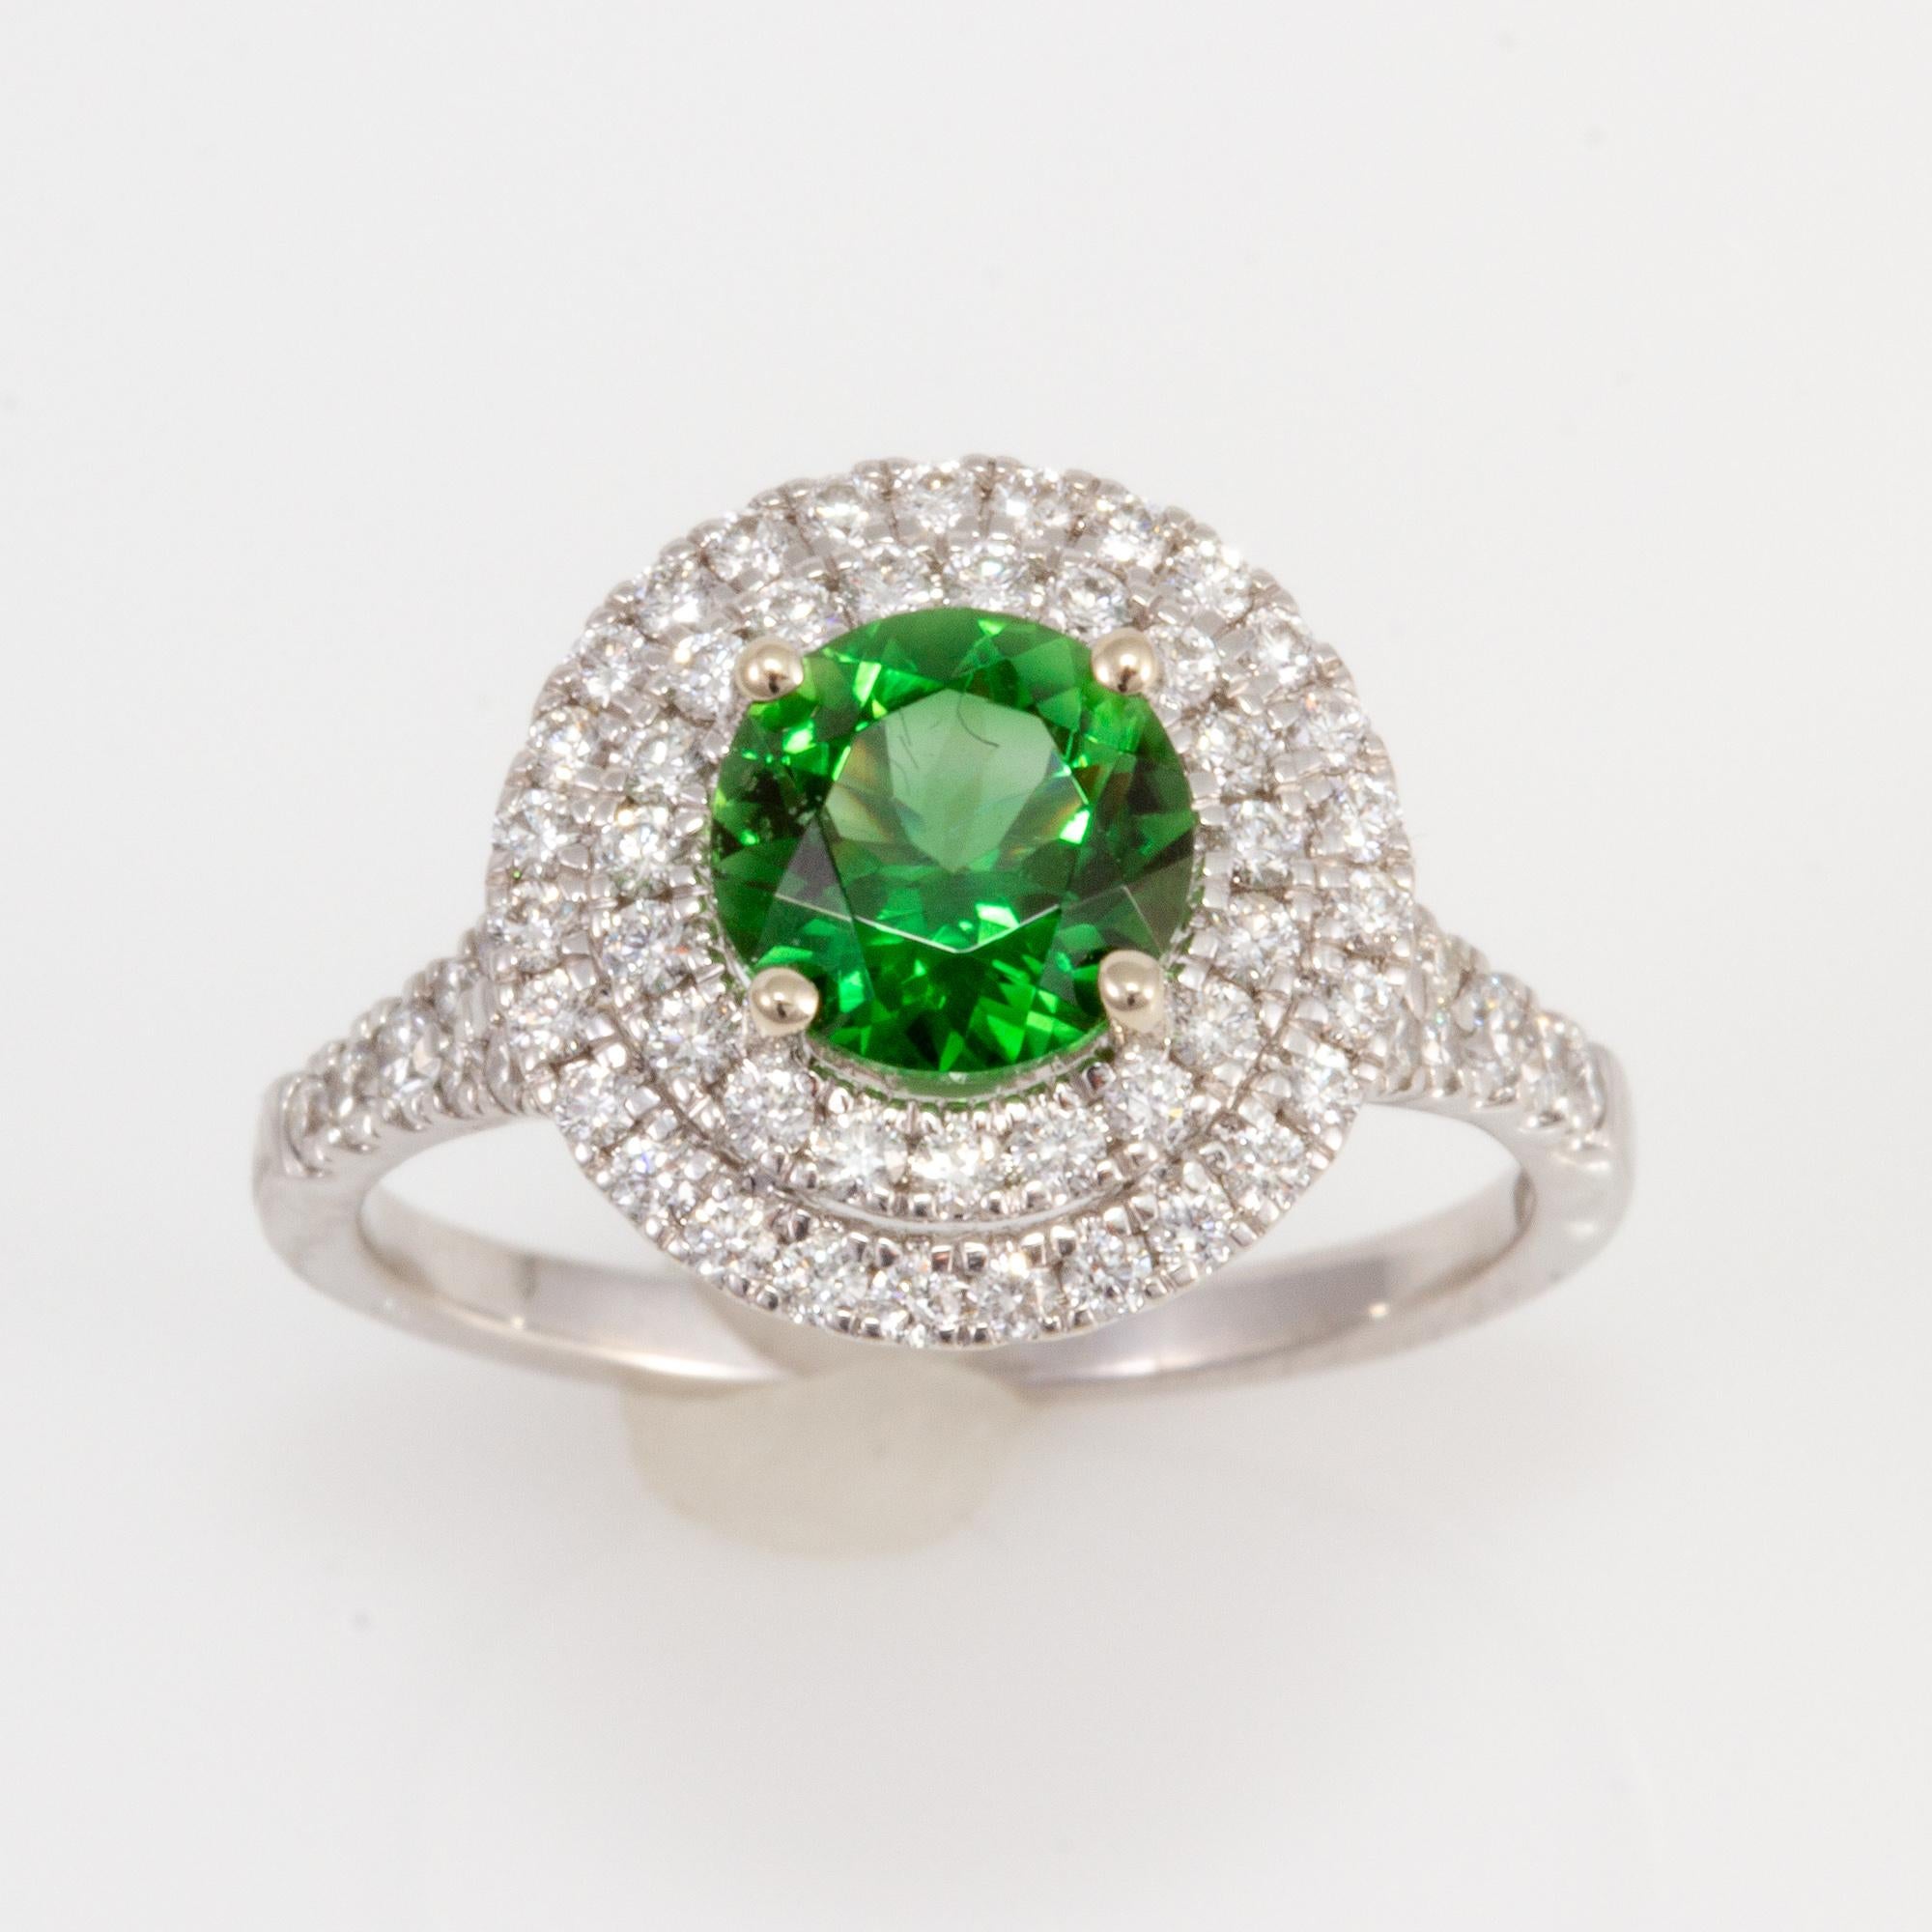 Classical Greek Exceptionally Well Cut 1.26 Carat Chrome Tourmaline and Diamond Ring